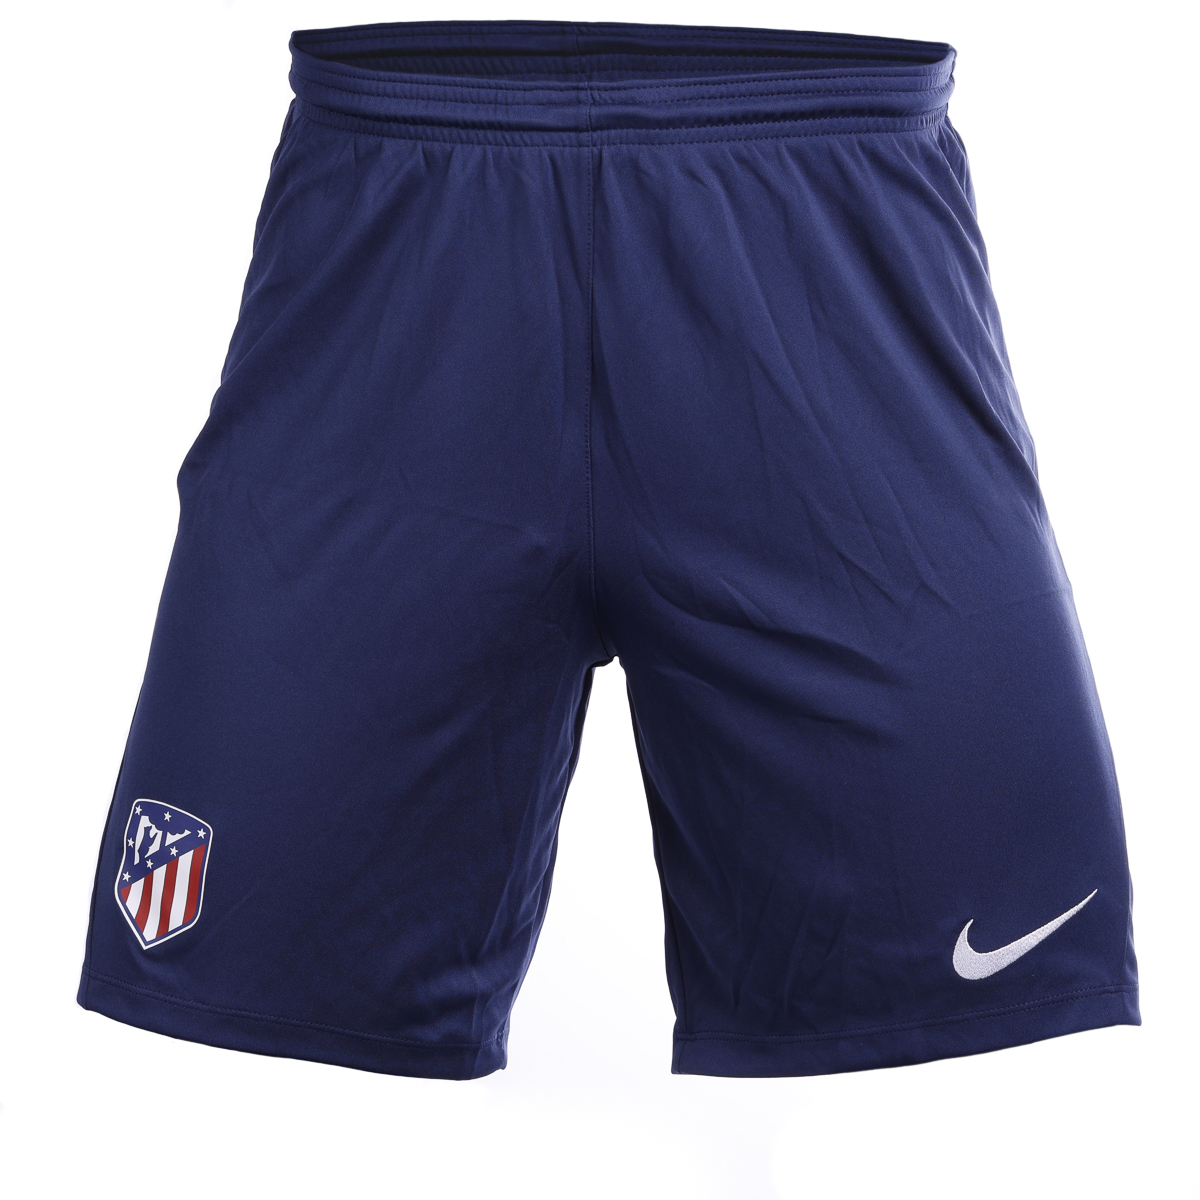 MEN SHORTS FOURTH 23/24 JERSEY image number null